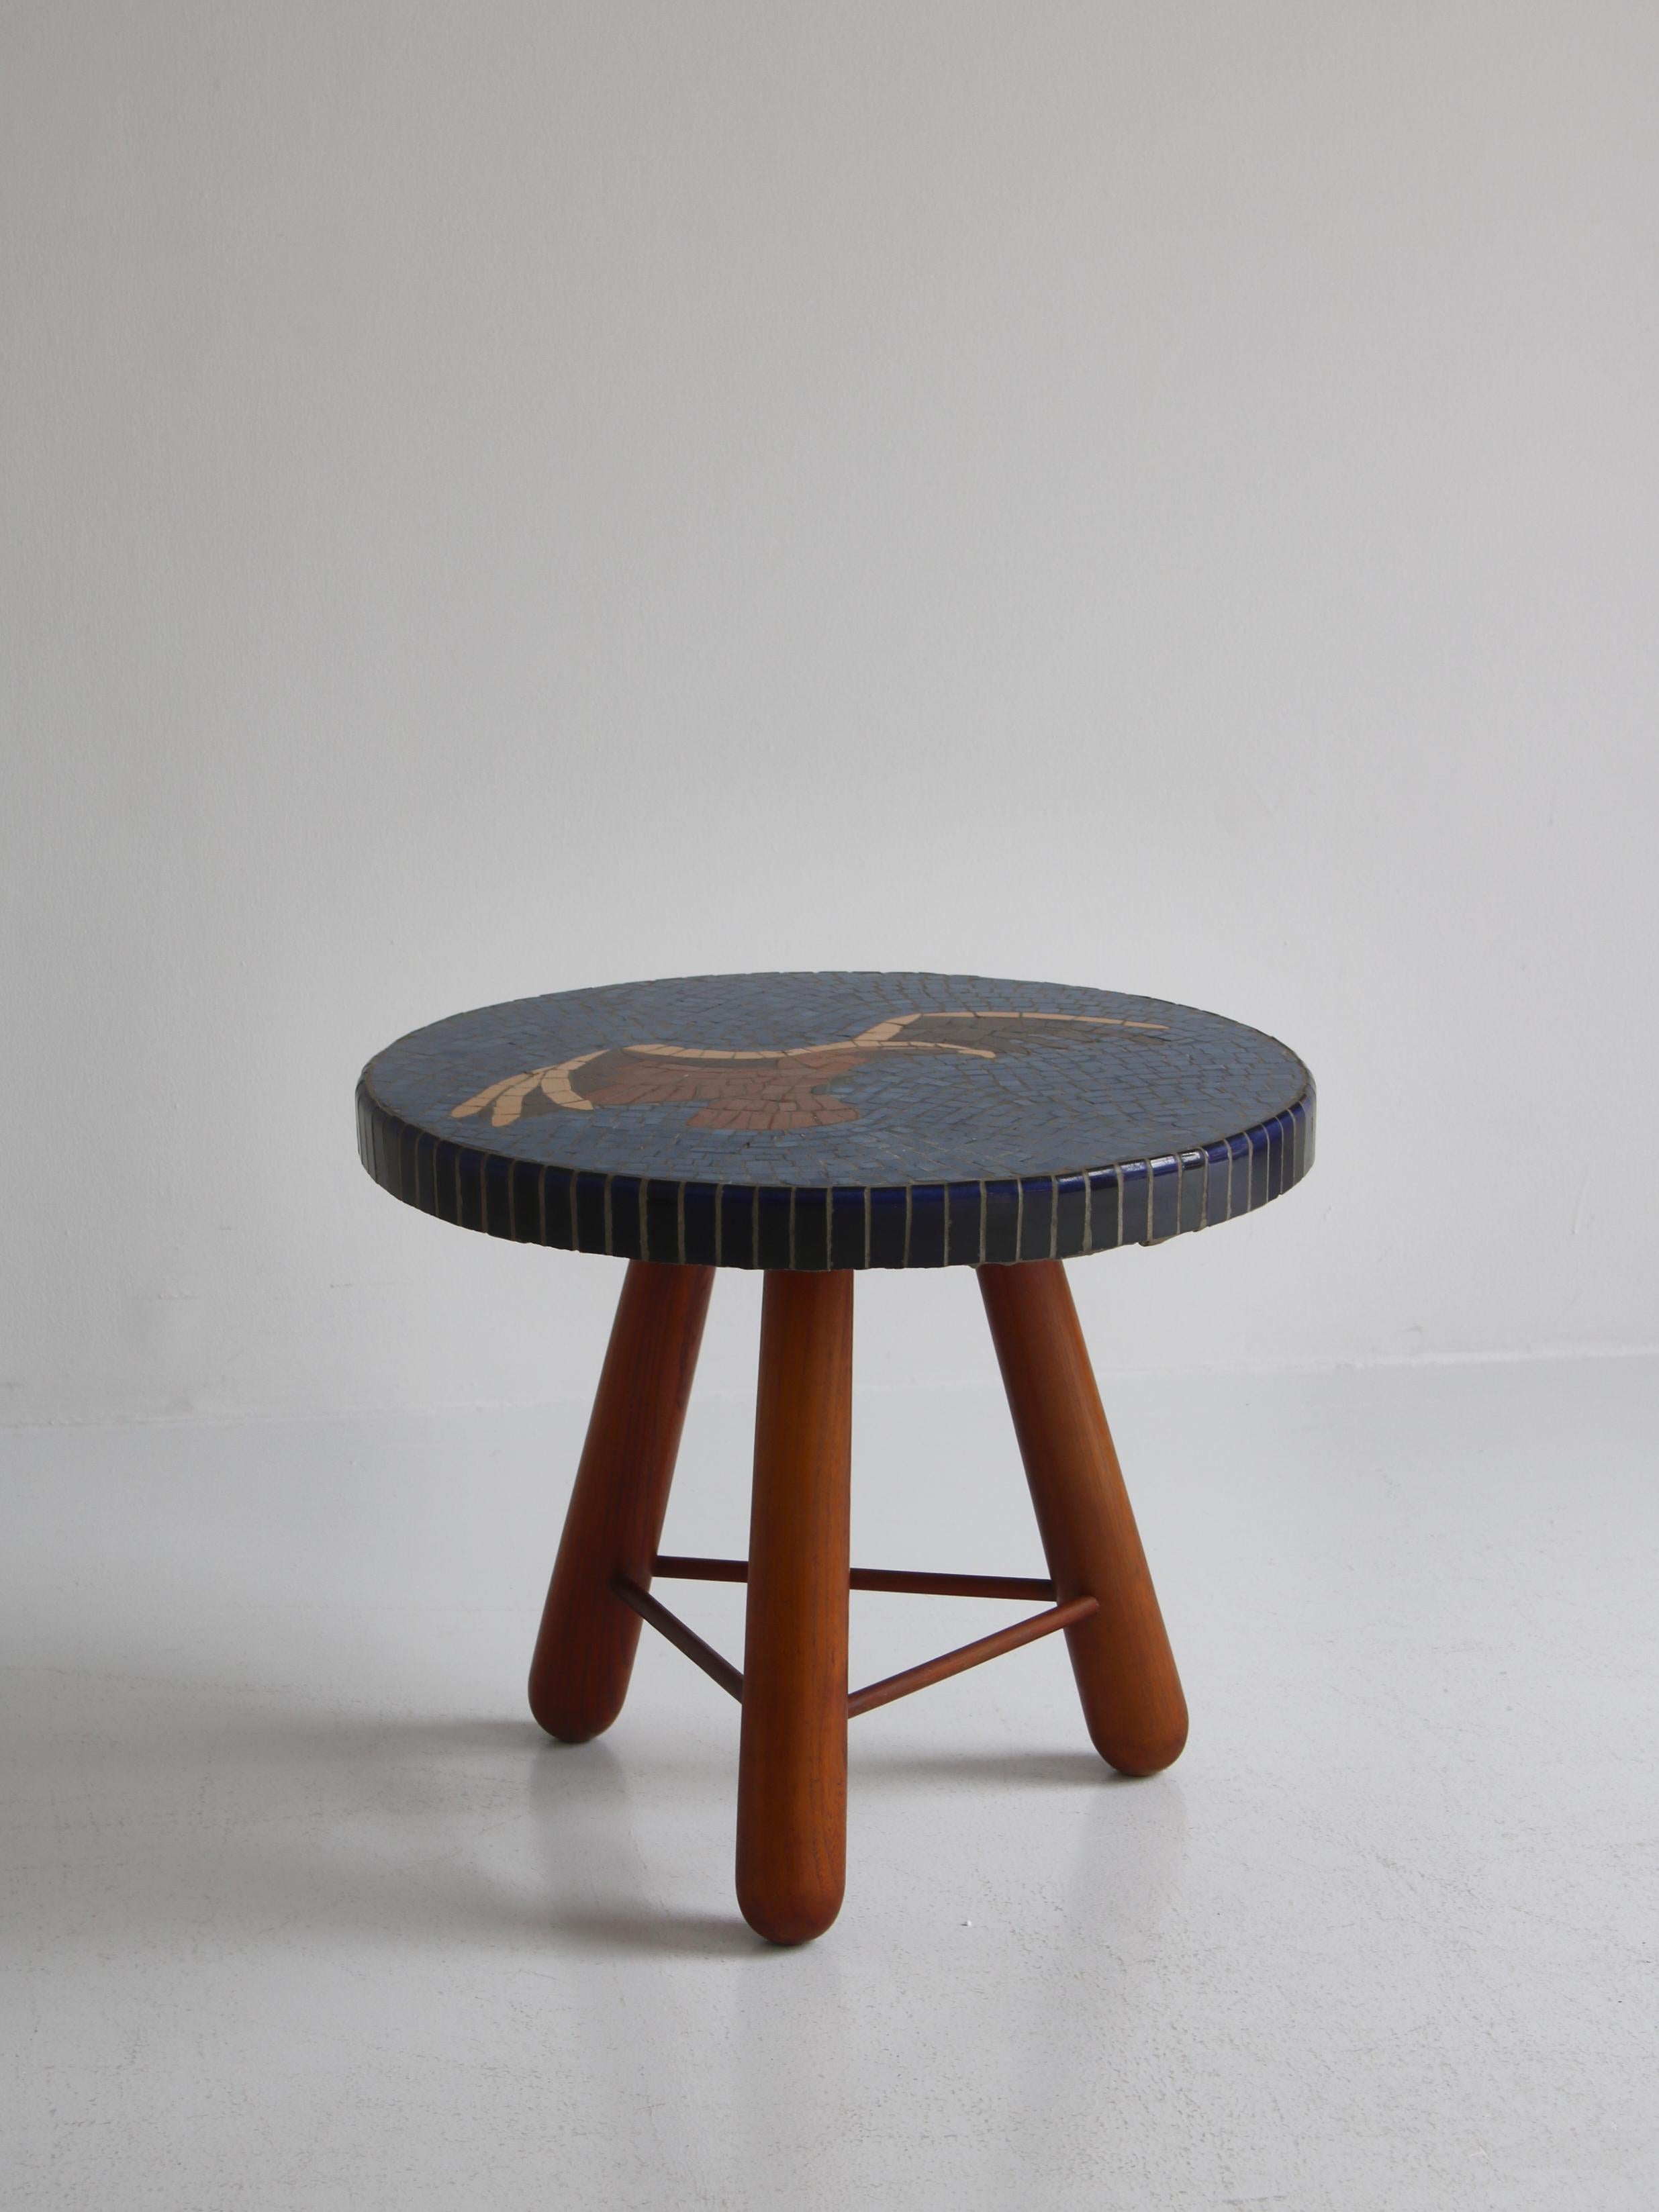 Round side Table, Otto Færge in Stained Elm & Blue Mosaic Tiles, Denmark, 1940 For Sale 1